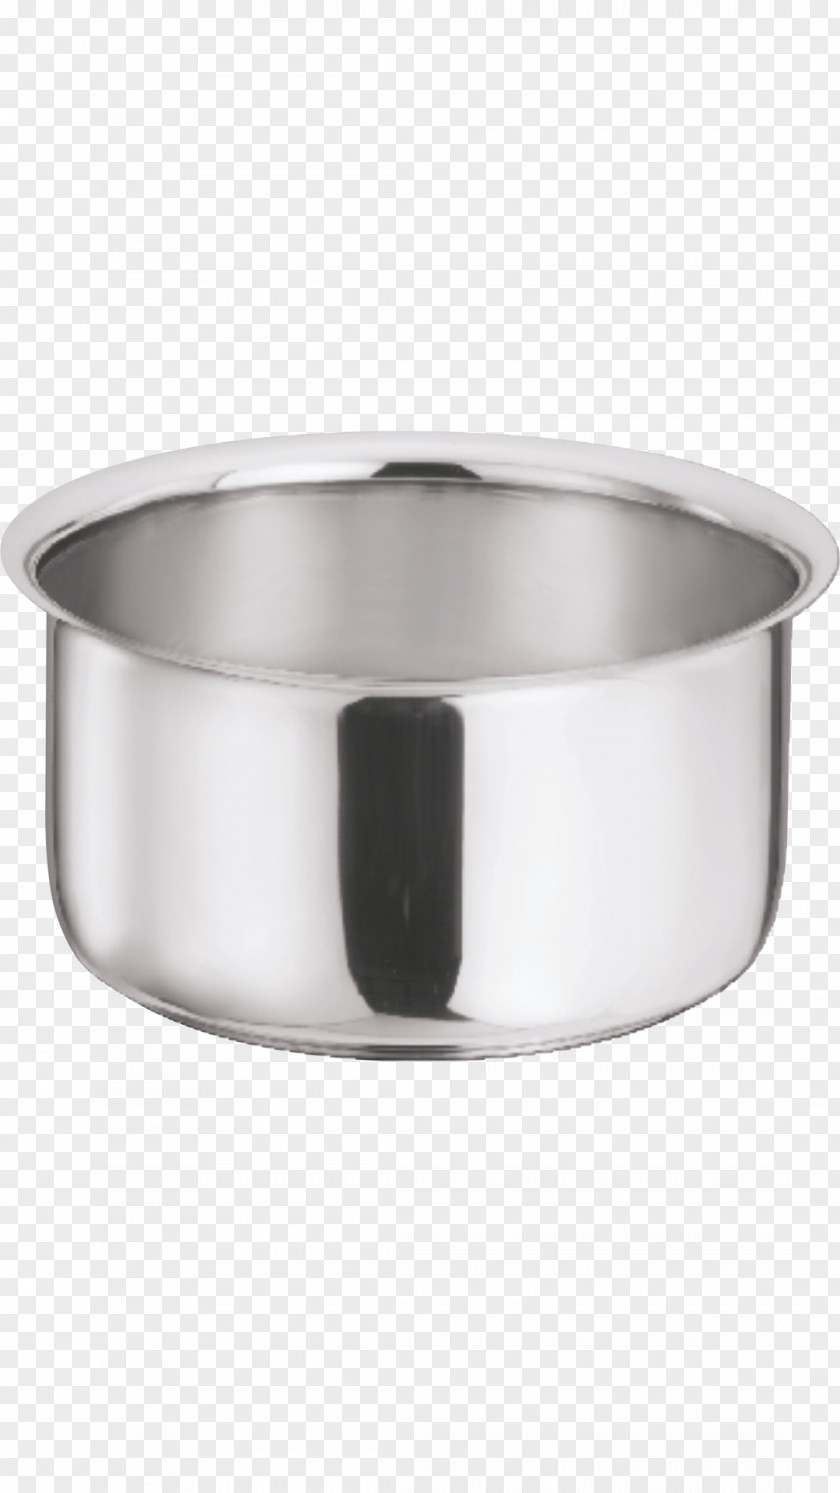 Kitchen Cookware Induction Cooking Utensil Stainless Steel Olla PNG